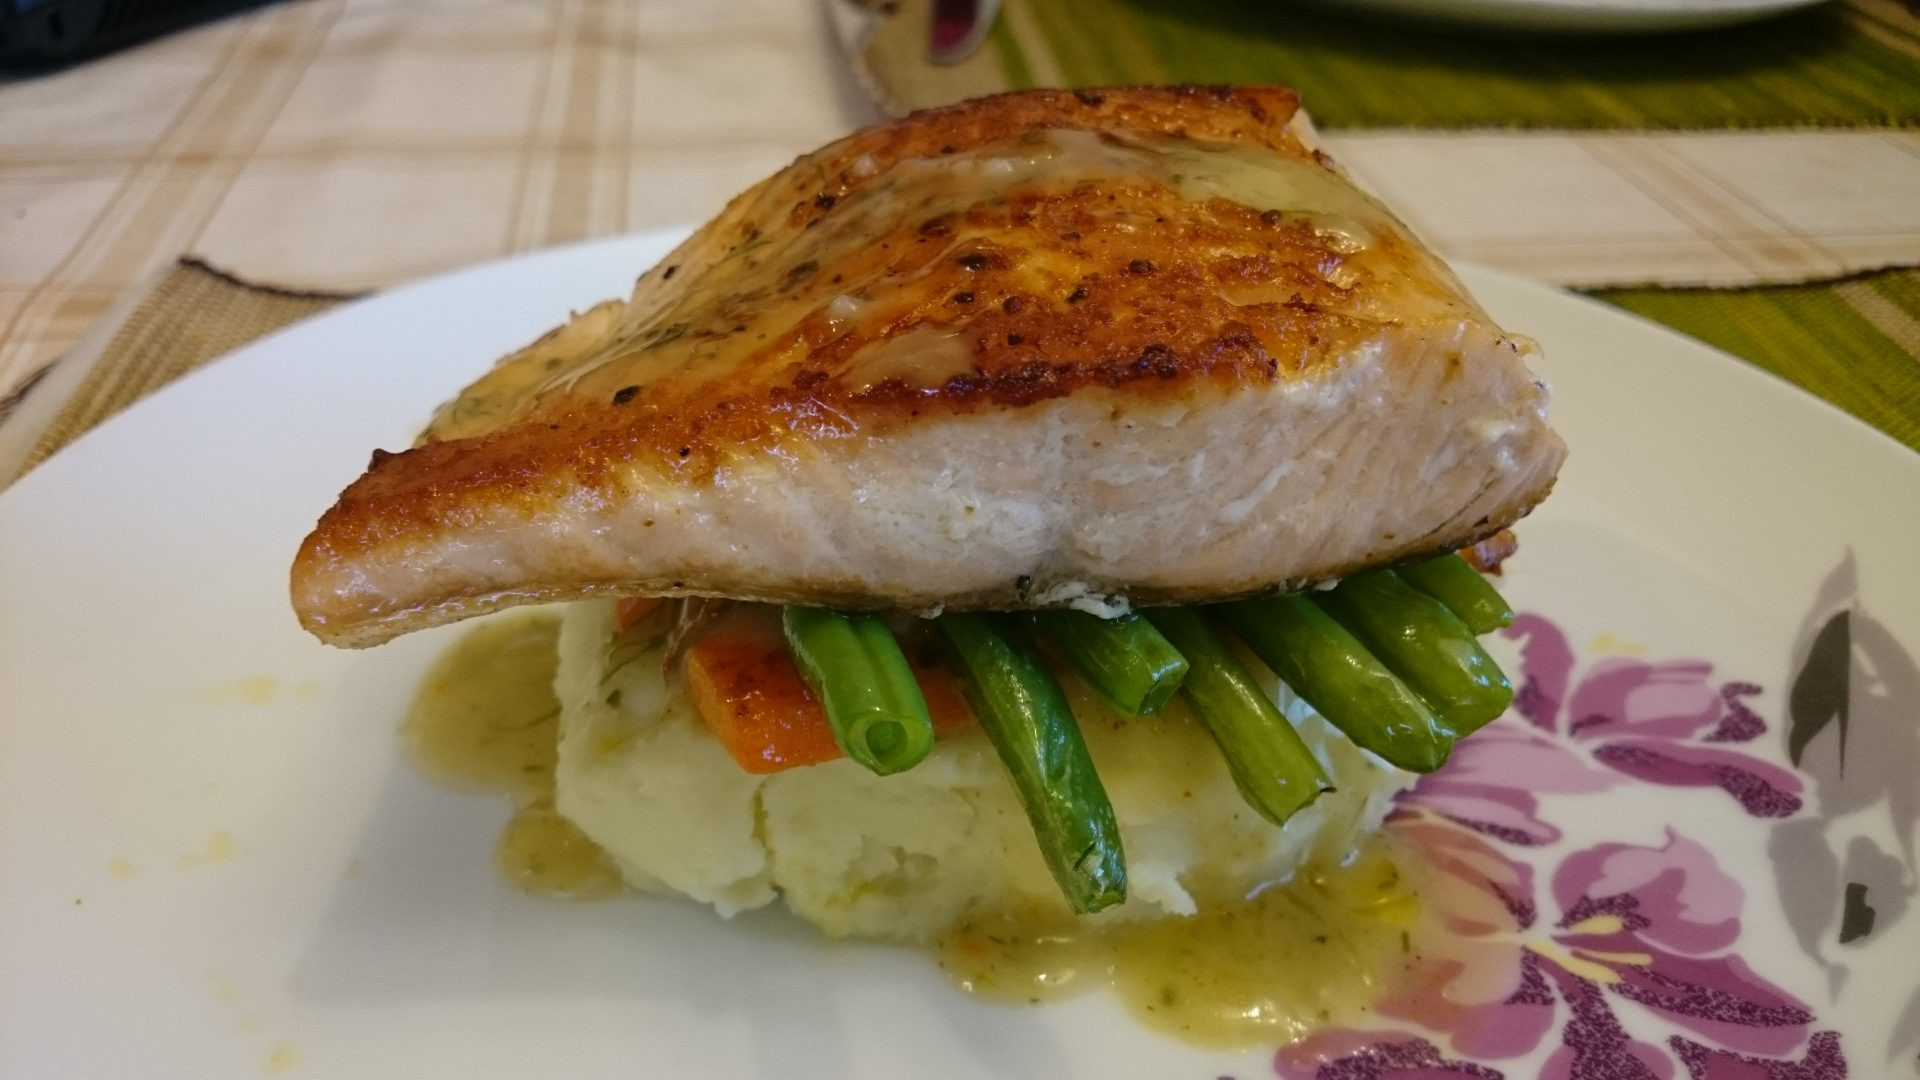 Salmon And Mashed Potatoes
 Pan Fried Salmon on a Bed of Smooth Mashed Potatoes with